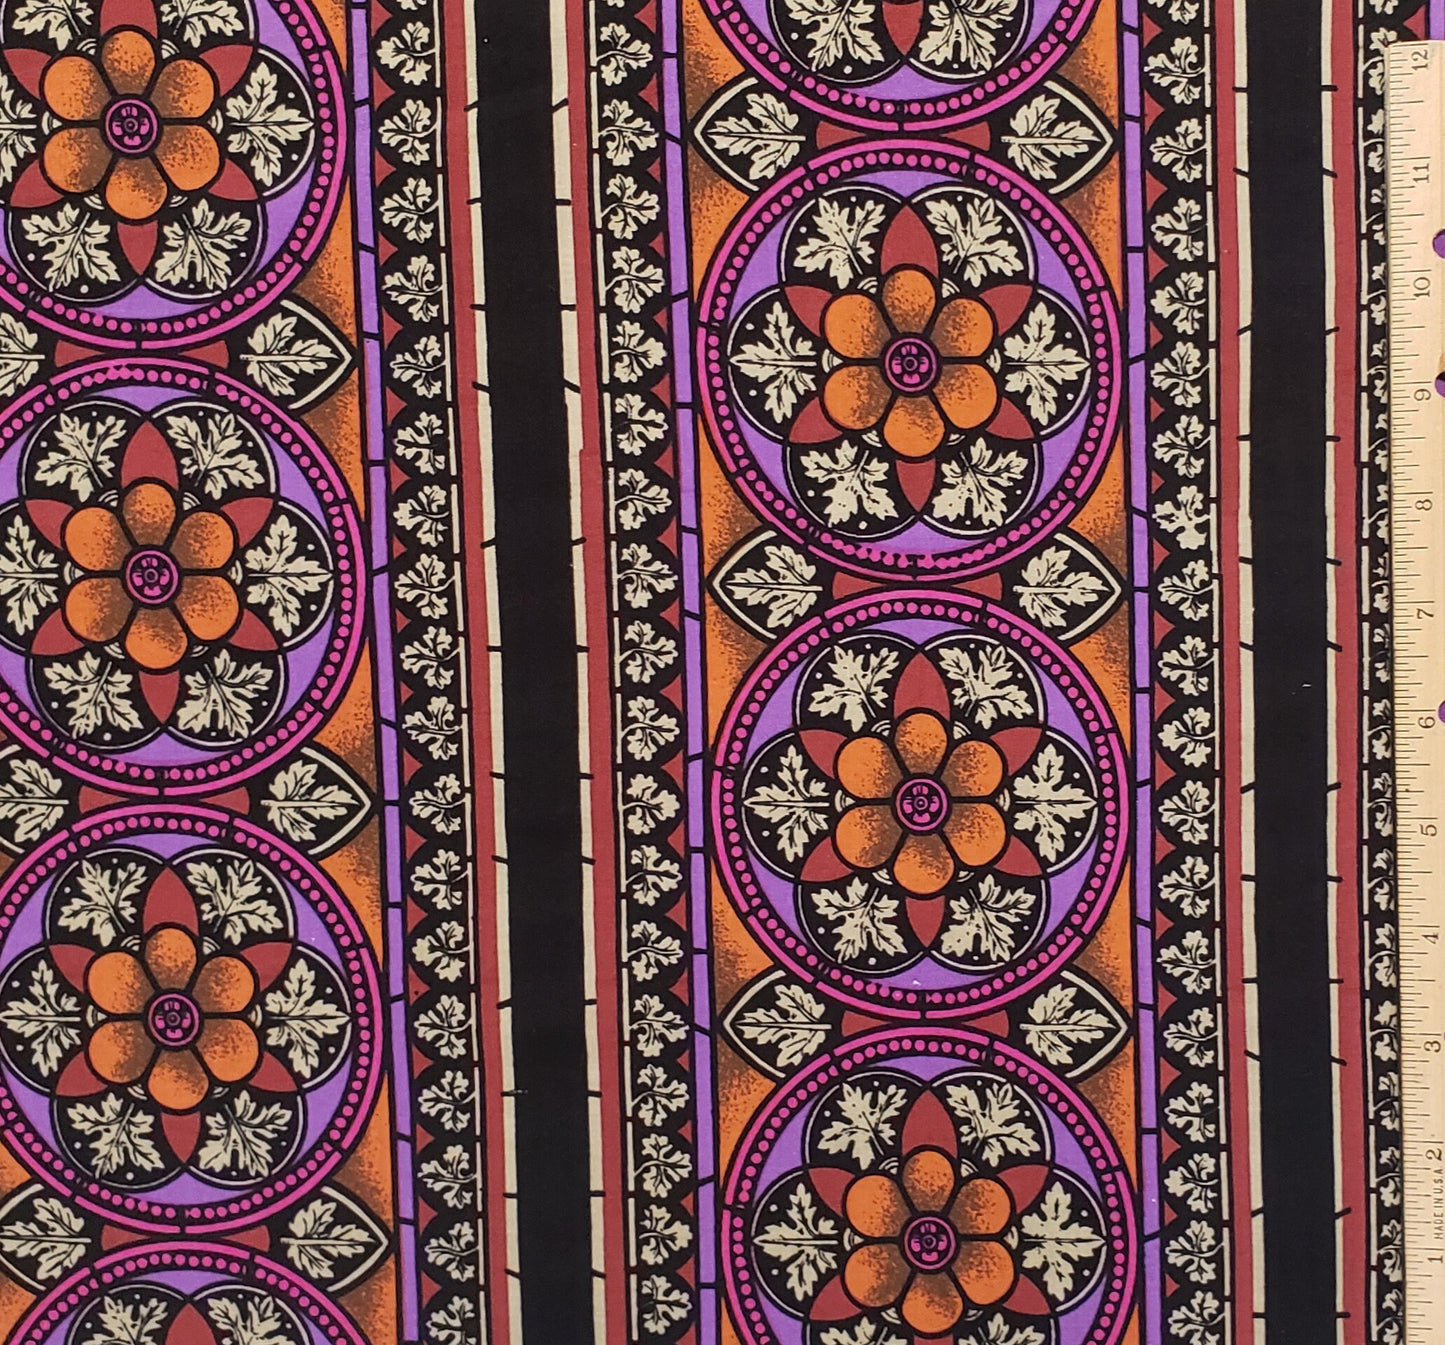 Mary Ellen Hopkins - Black Fabric / Rust, Purple, Orange Pattern - 42" WIDE FABRIC - Selvage only on one side